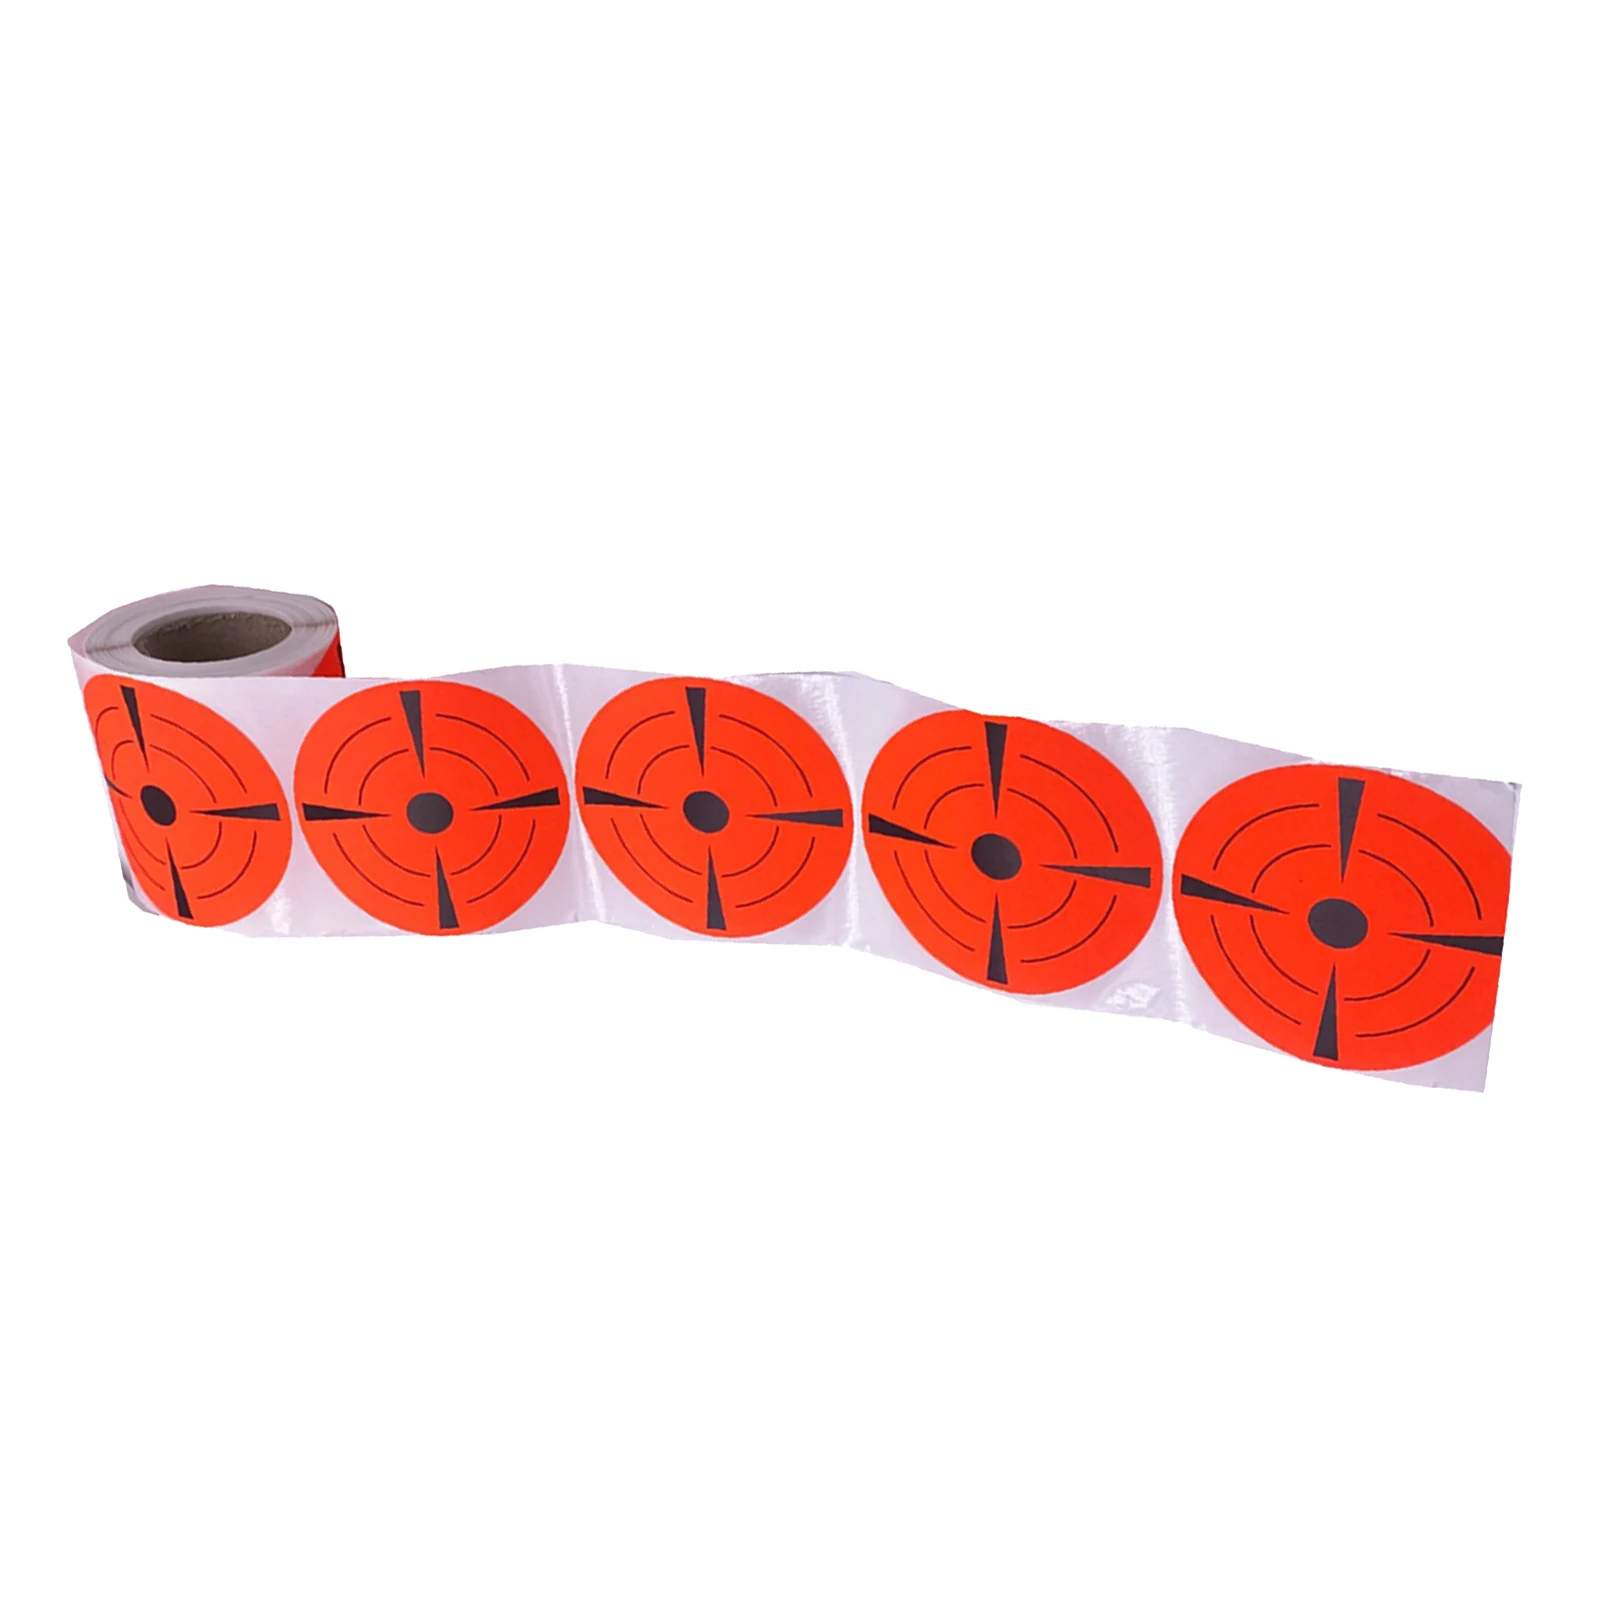 200pcs/roll Paper Target Florescent Adhesive Shooting Target Stickers for Archery Bow Hunting Shooting Training